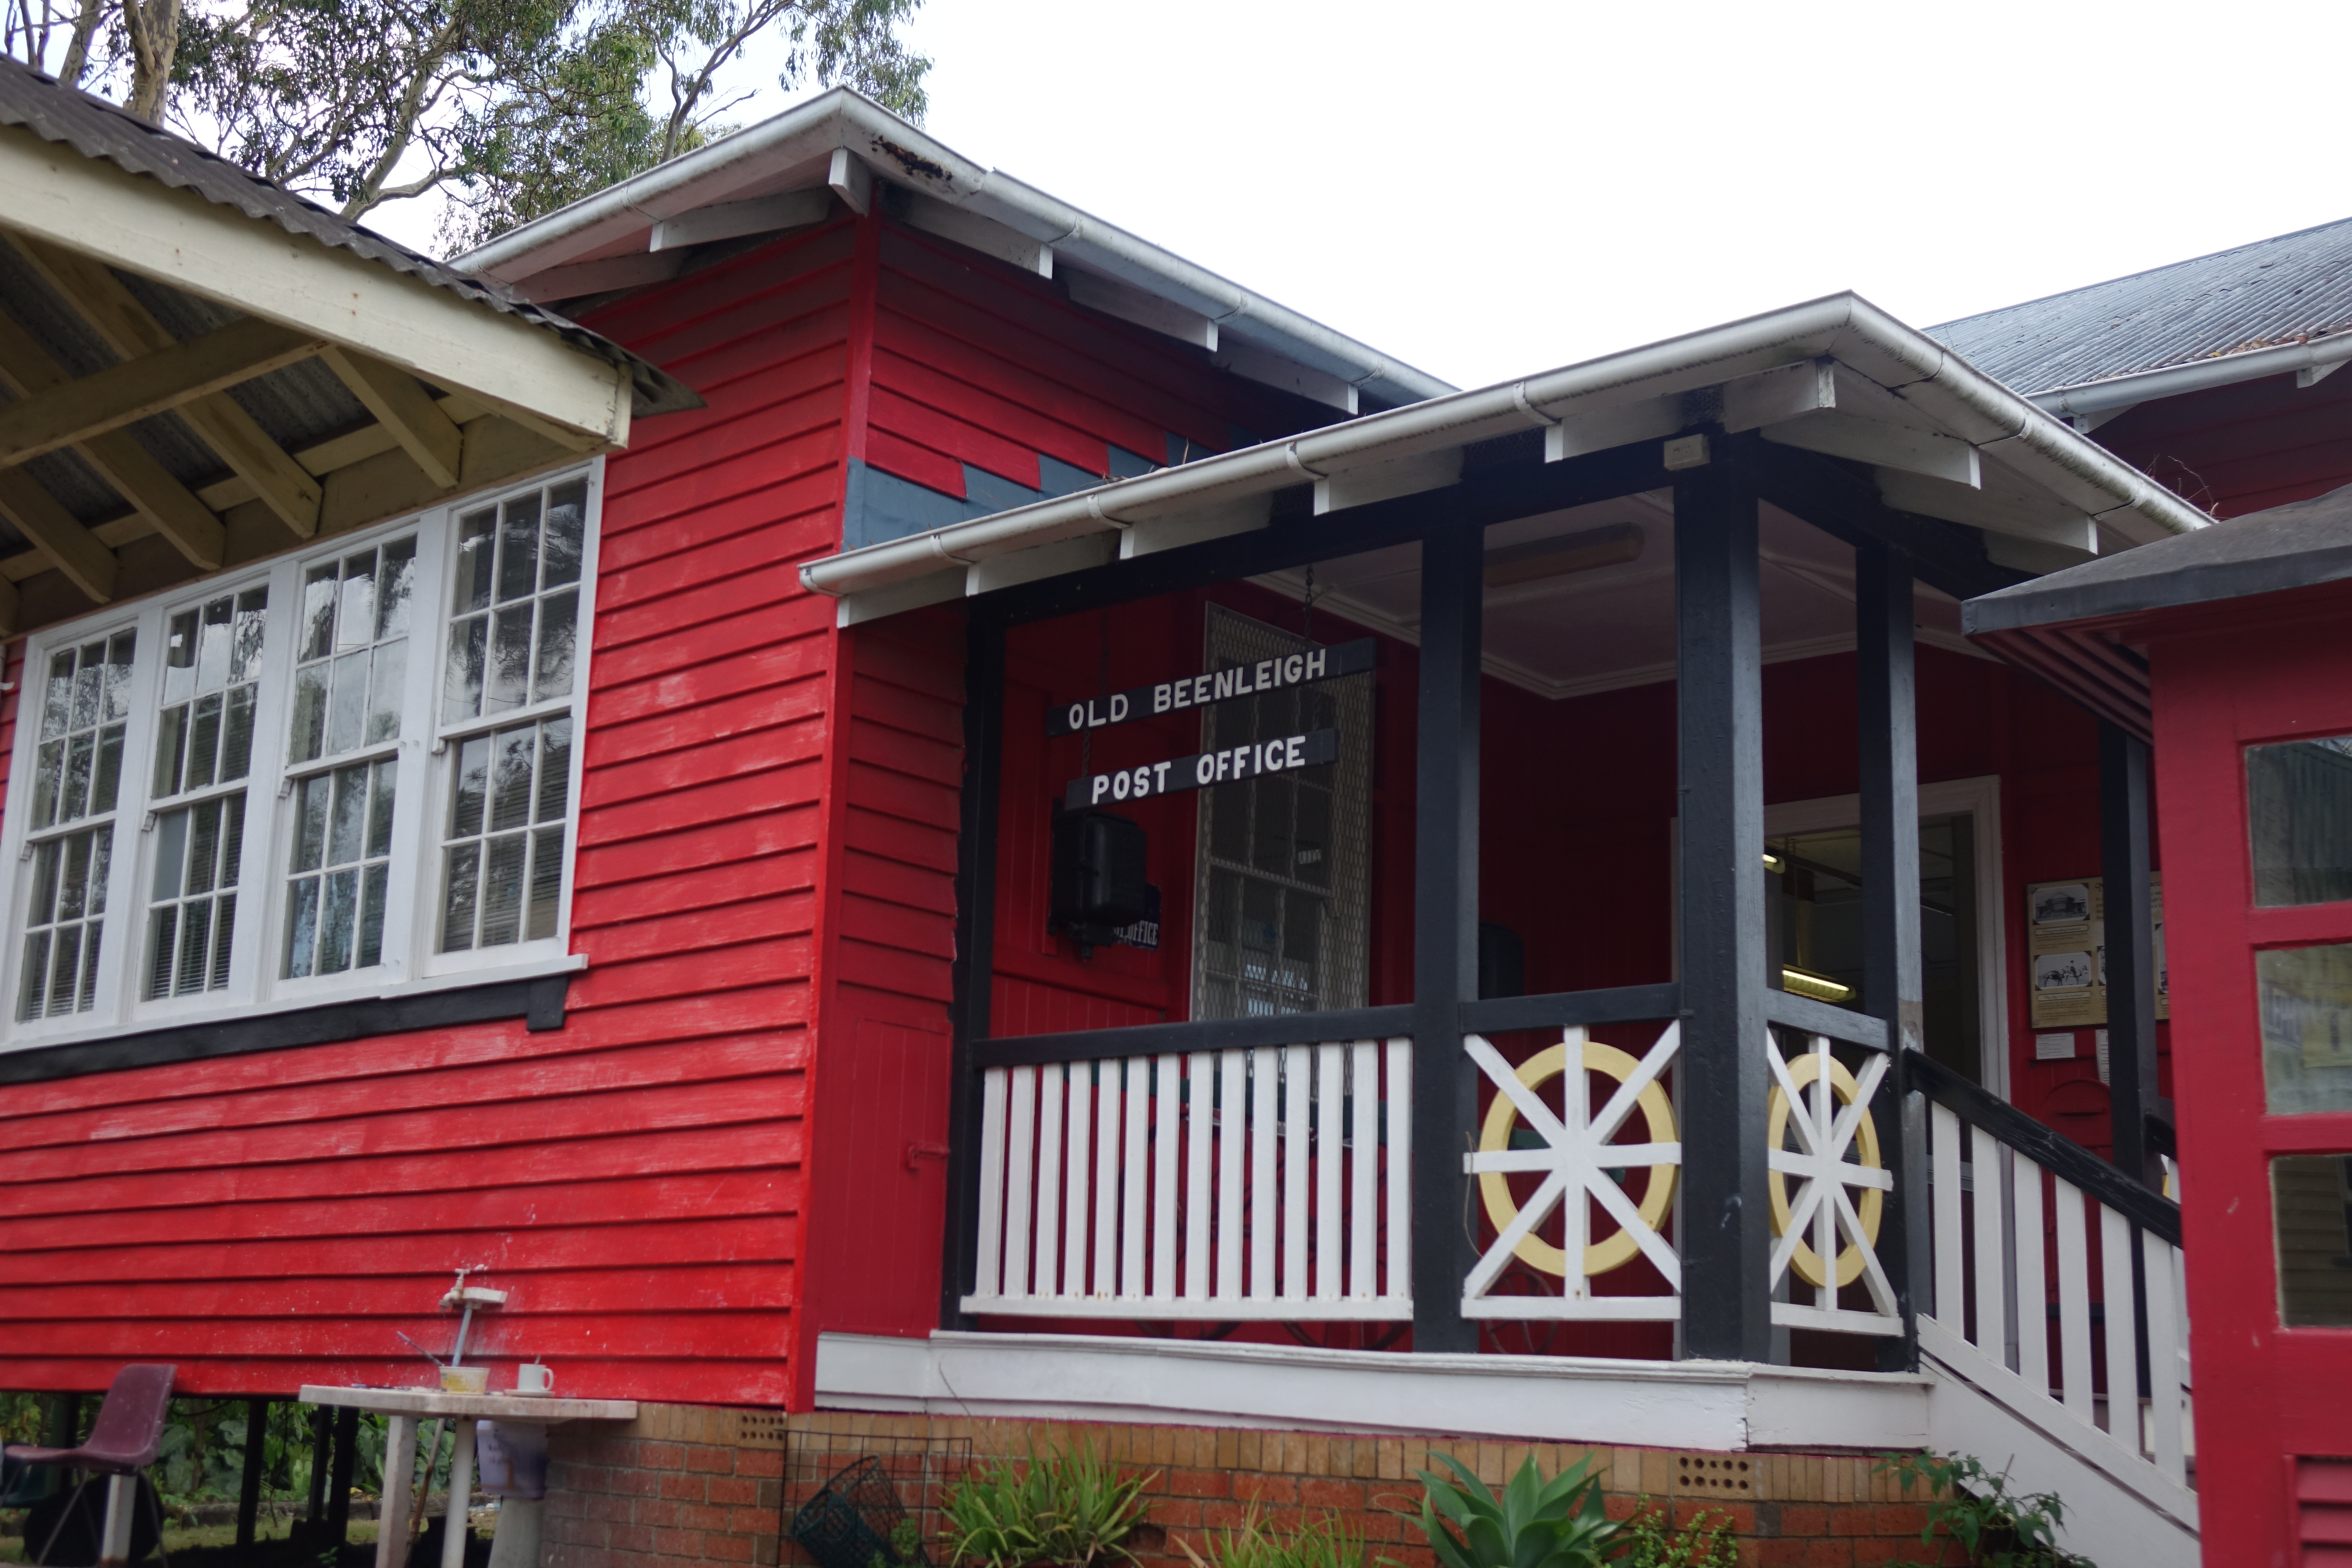 Old Beenleigh Post Office - Spirits of the Red Sand